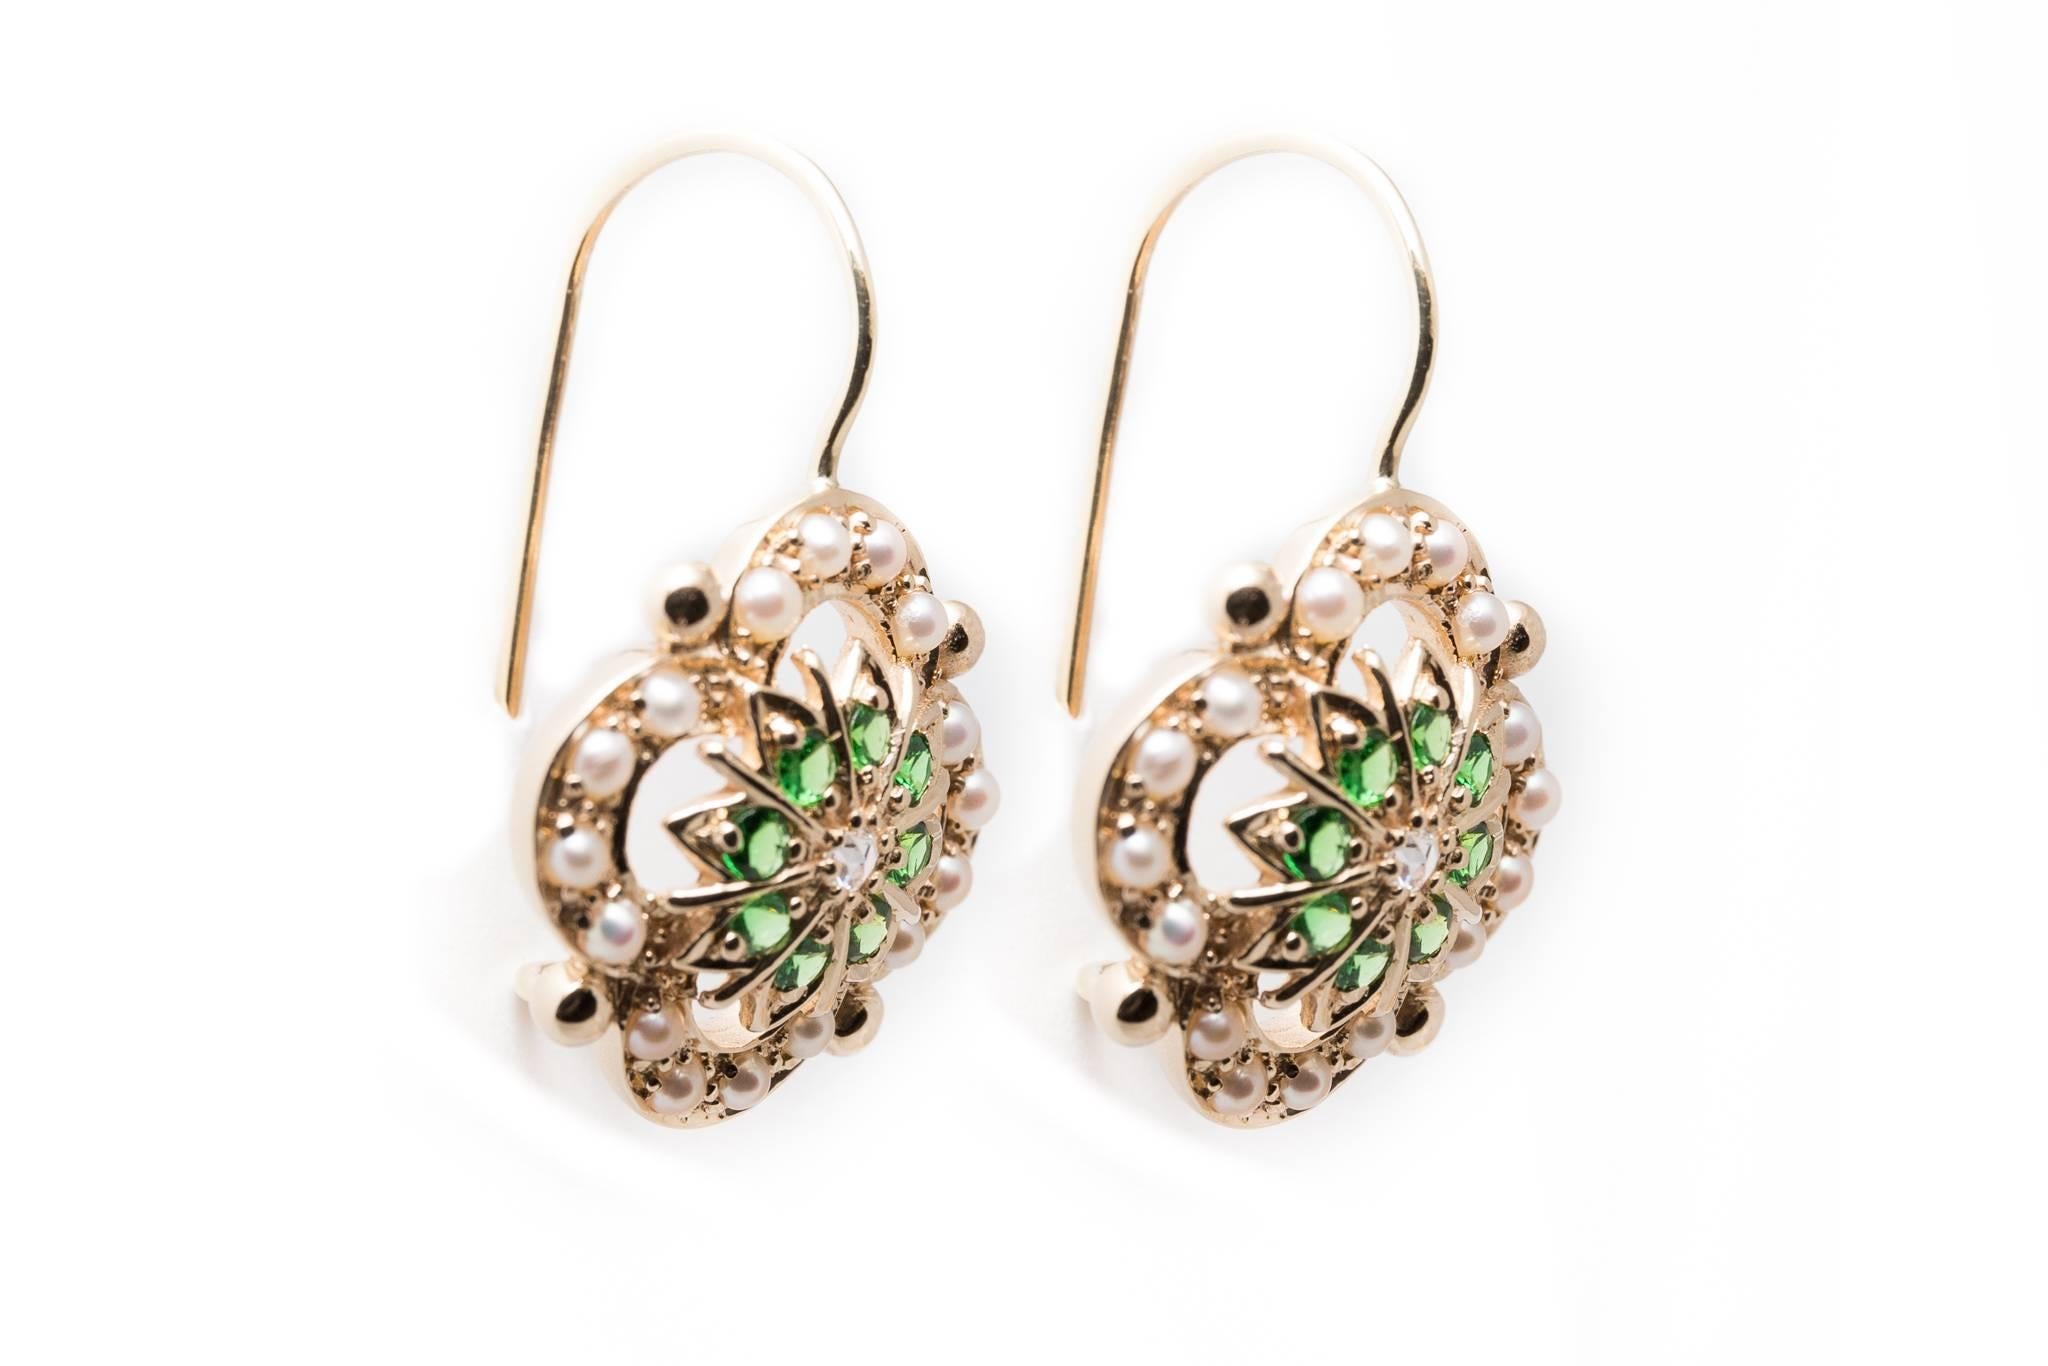 A beautiful pair of diamond, demantoid garnet, and pearl earrings in yellow gold.  Centered by a sparkling antique rose cut diamond encircled by demantoid garnets these earrings feature an outer halo of pearls.

Of beautiful quality, the center